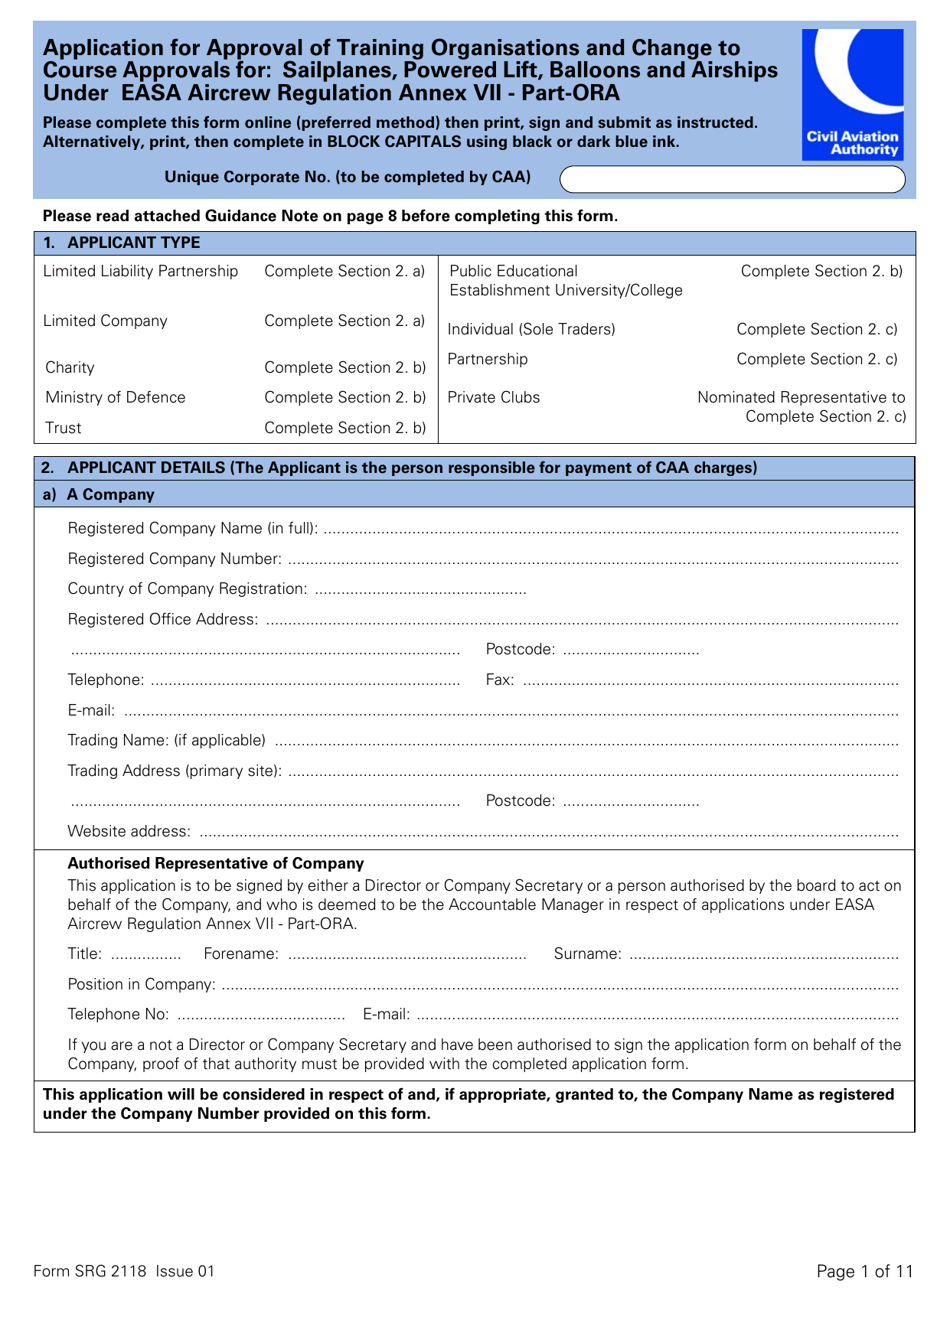 Form SRG2118 Application for Approval of Training Organisations and Change to Course Approvals for: Sailplanes, Powered Lift, Balloons and Airships Under Easa Aircrew Regulation Annex VII - Part-Ora - United Kingdom, Page 1